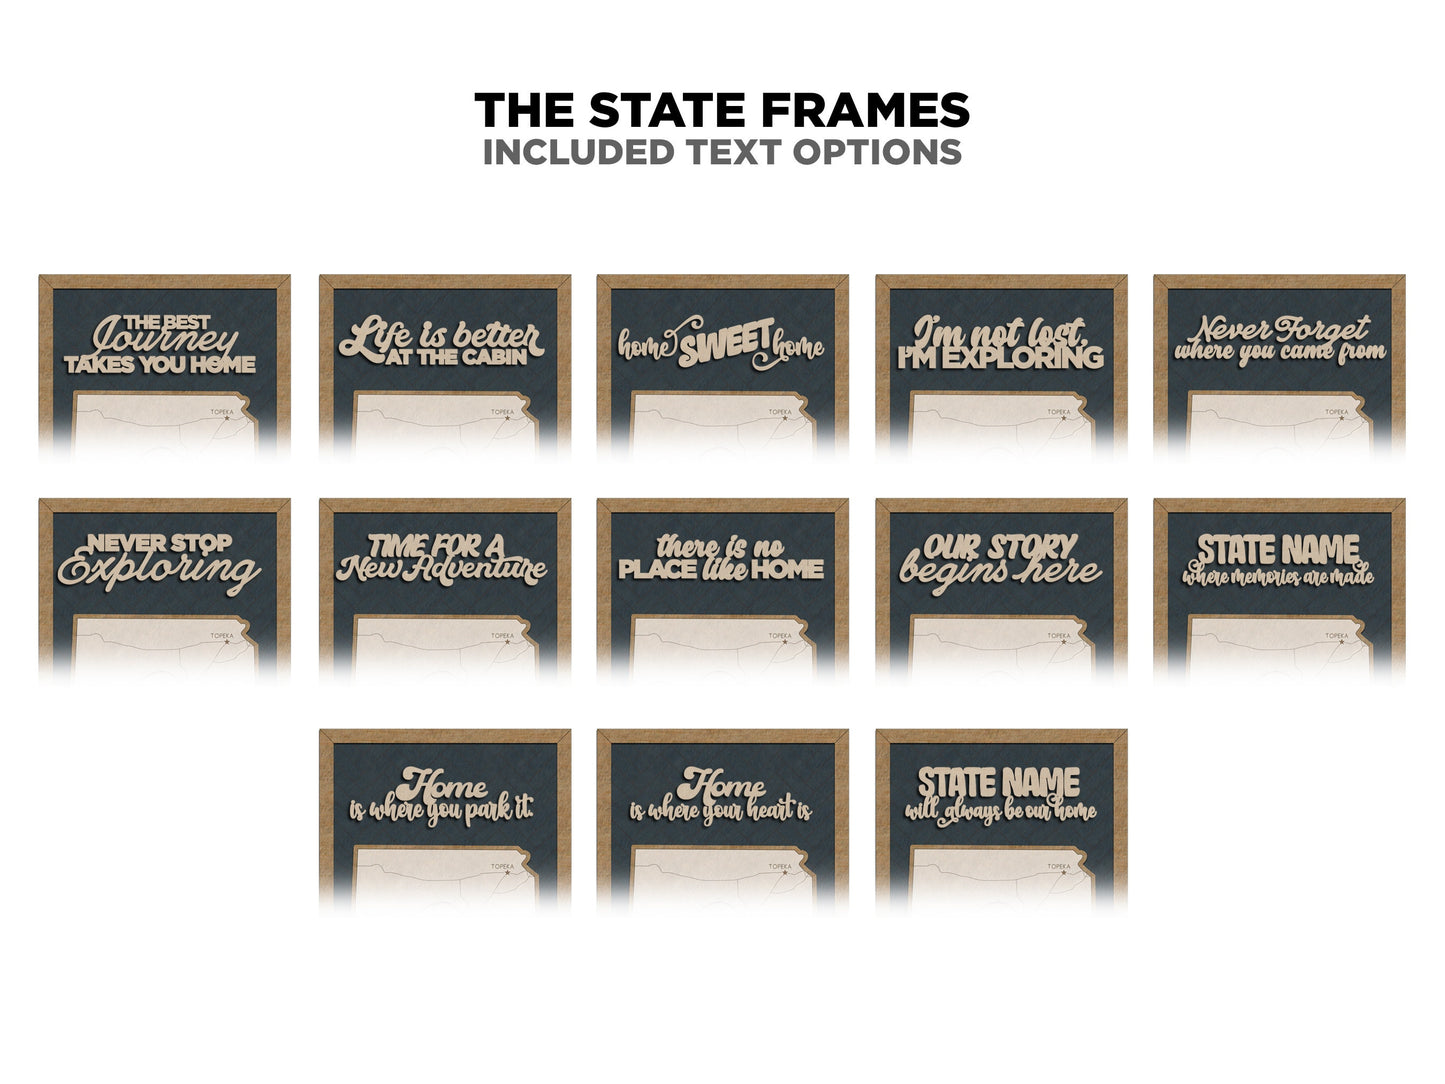 The Ohio State Frame - 13 text options, 12 backgrounds, 25 icons Included - Make over 7,500 designs - Glowforge & Lightburn Tested